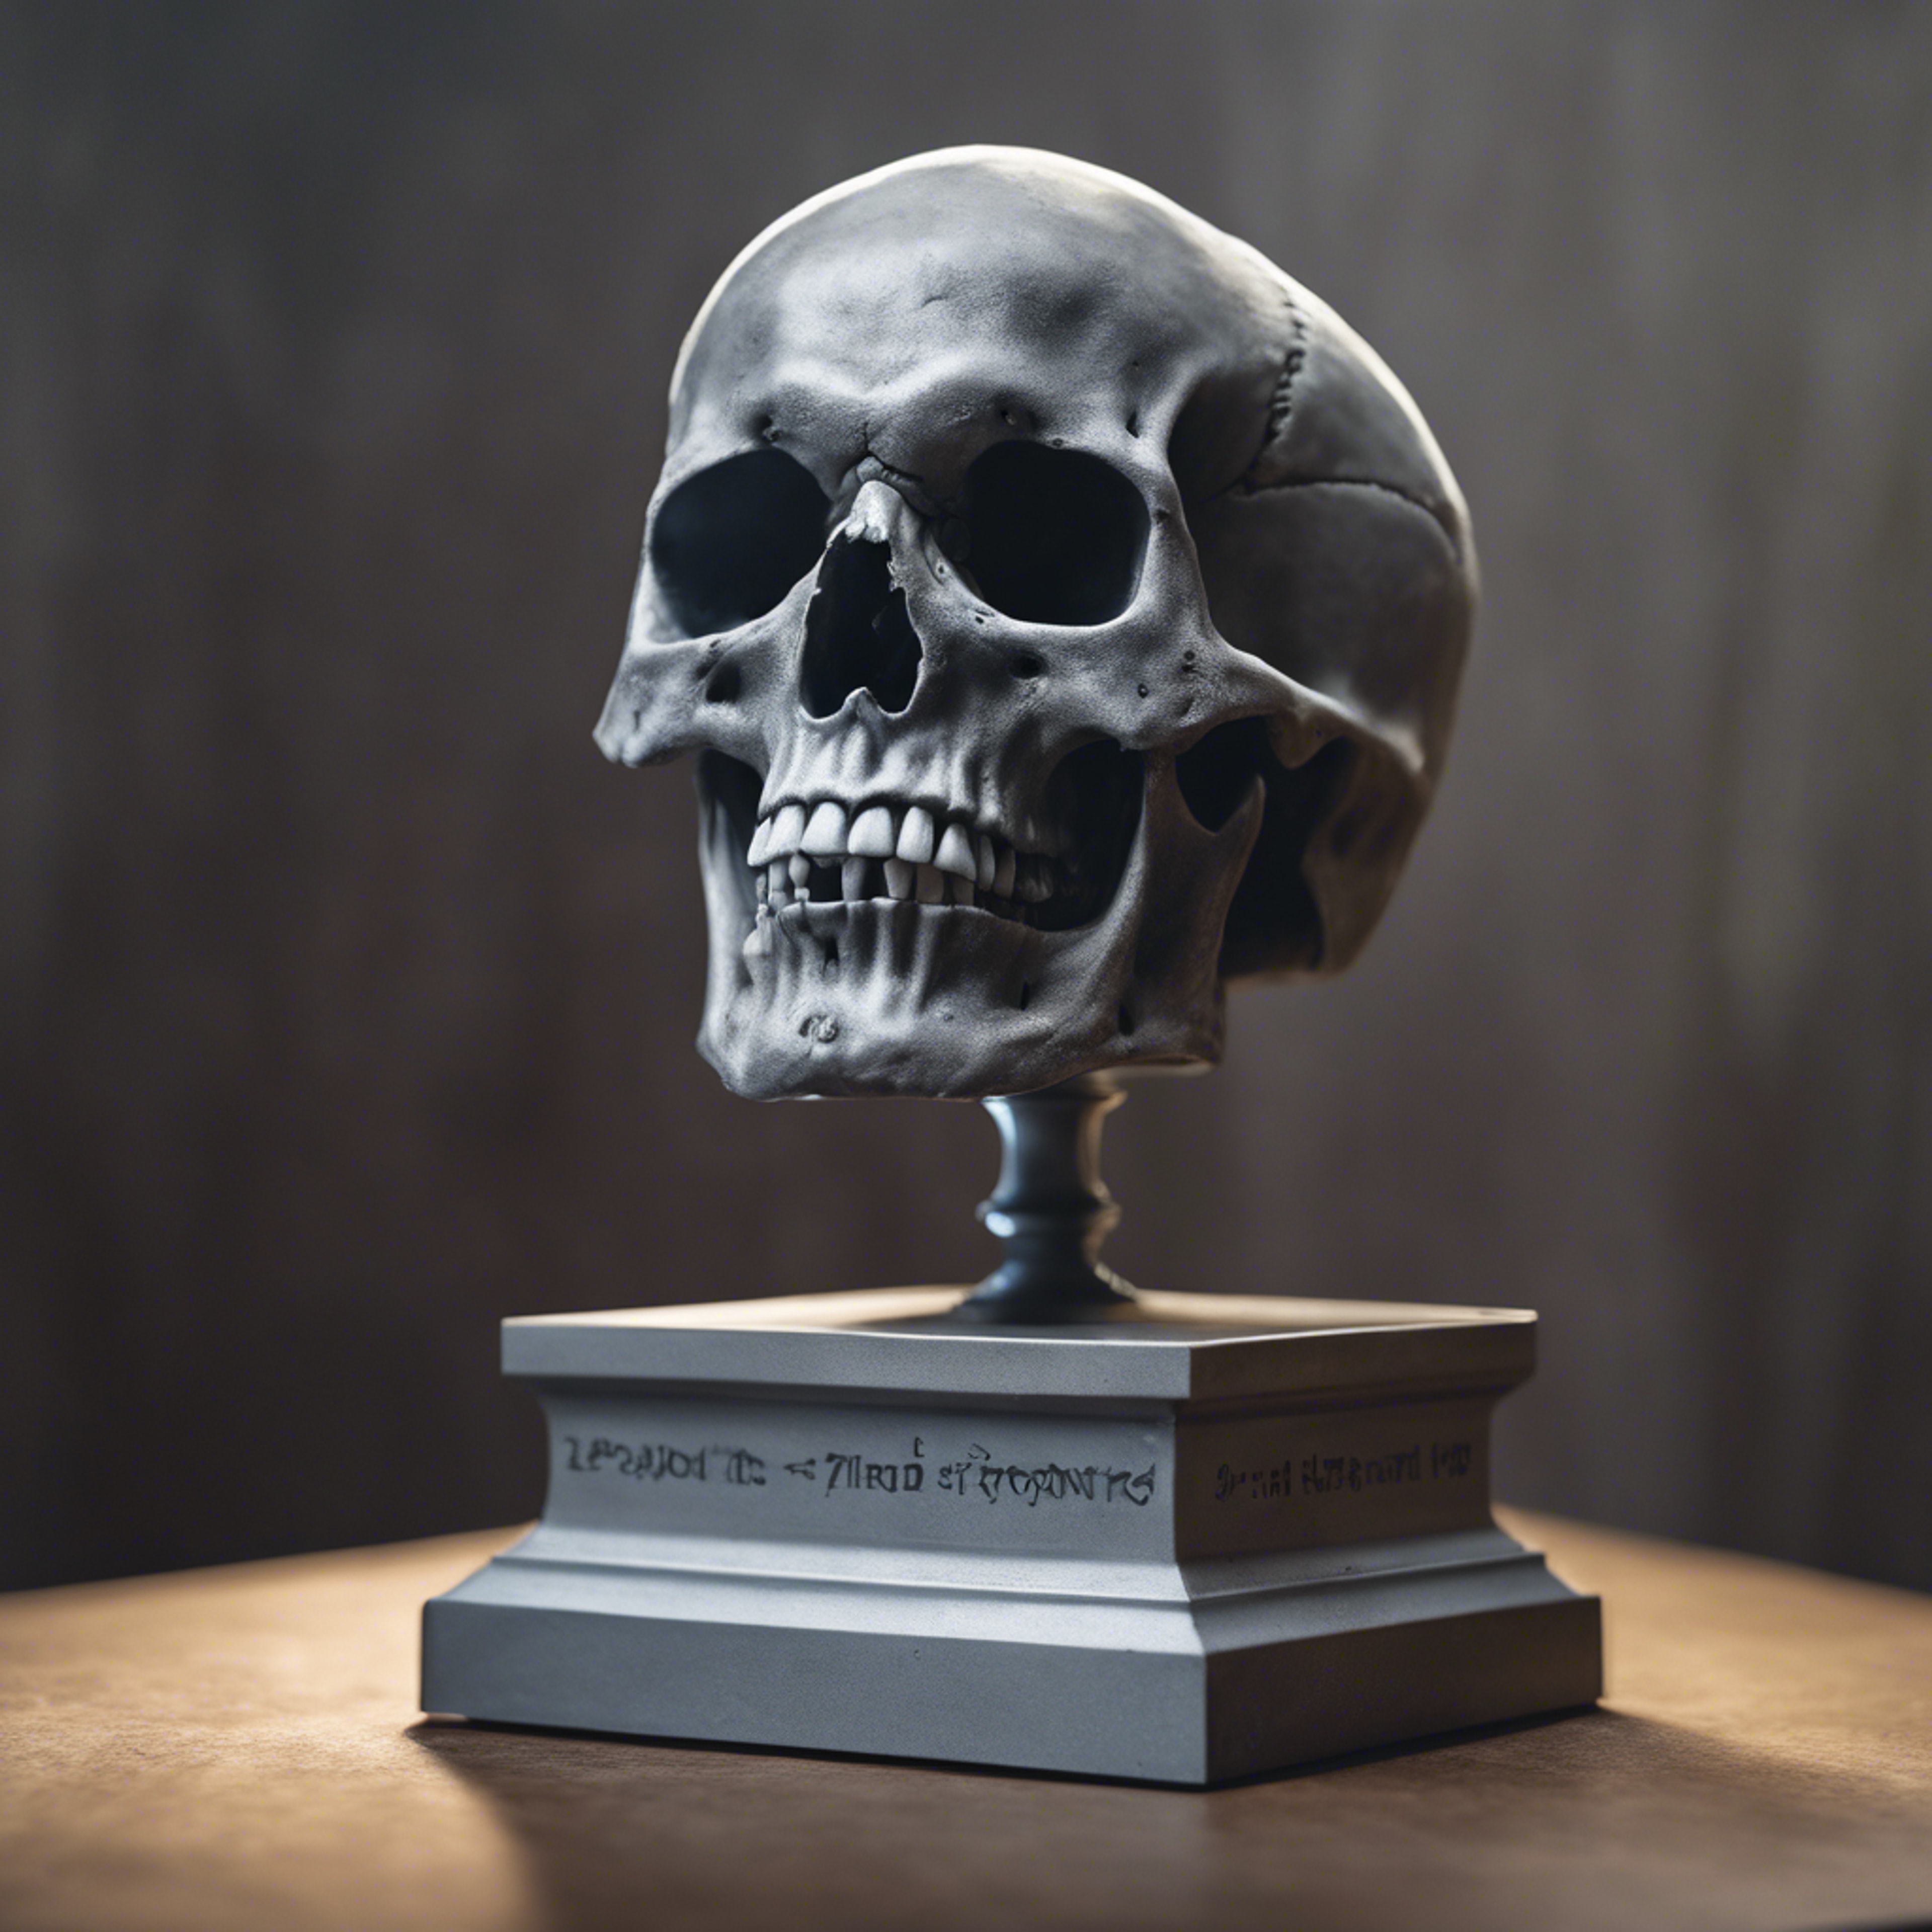 A spot-lit gray skull on a pedestal, starring in a classic horror movie scene. Валлпапер[96b08be545414606ae5a]